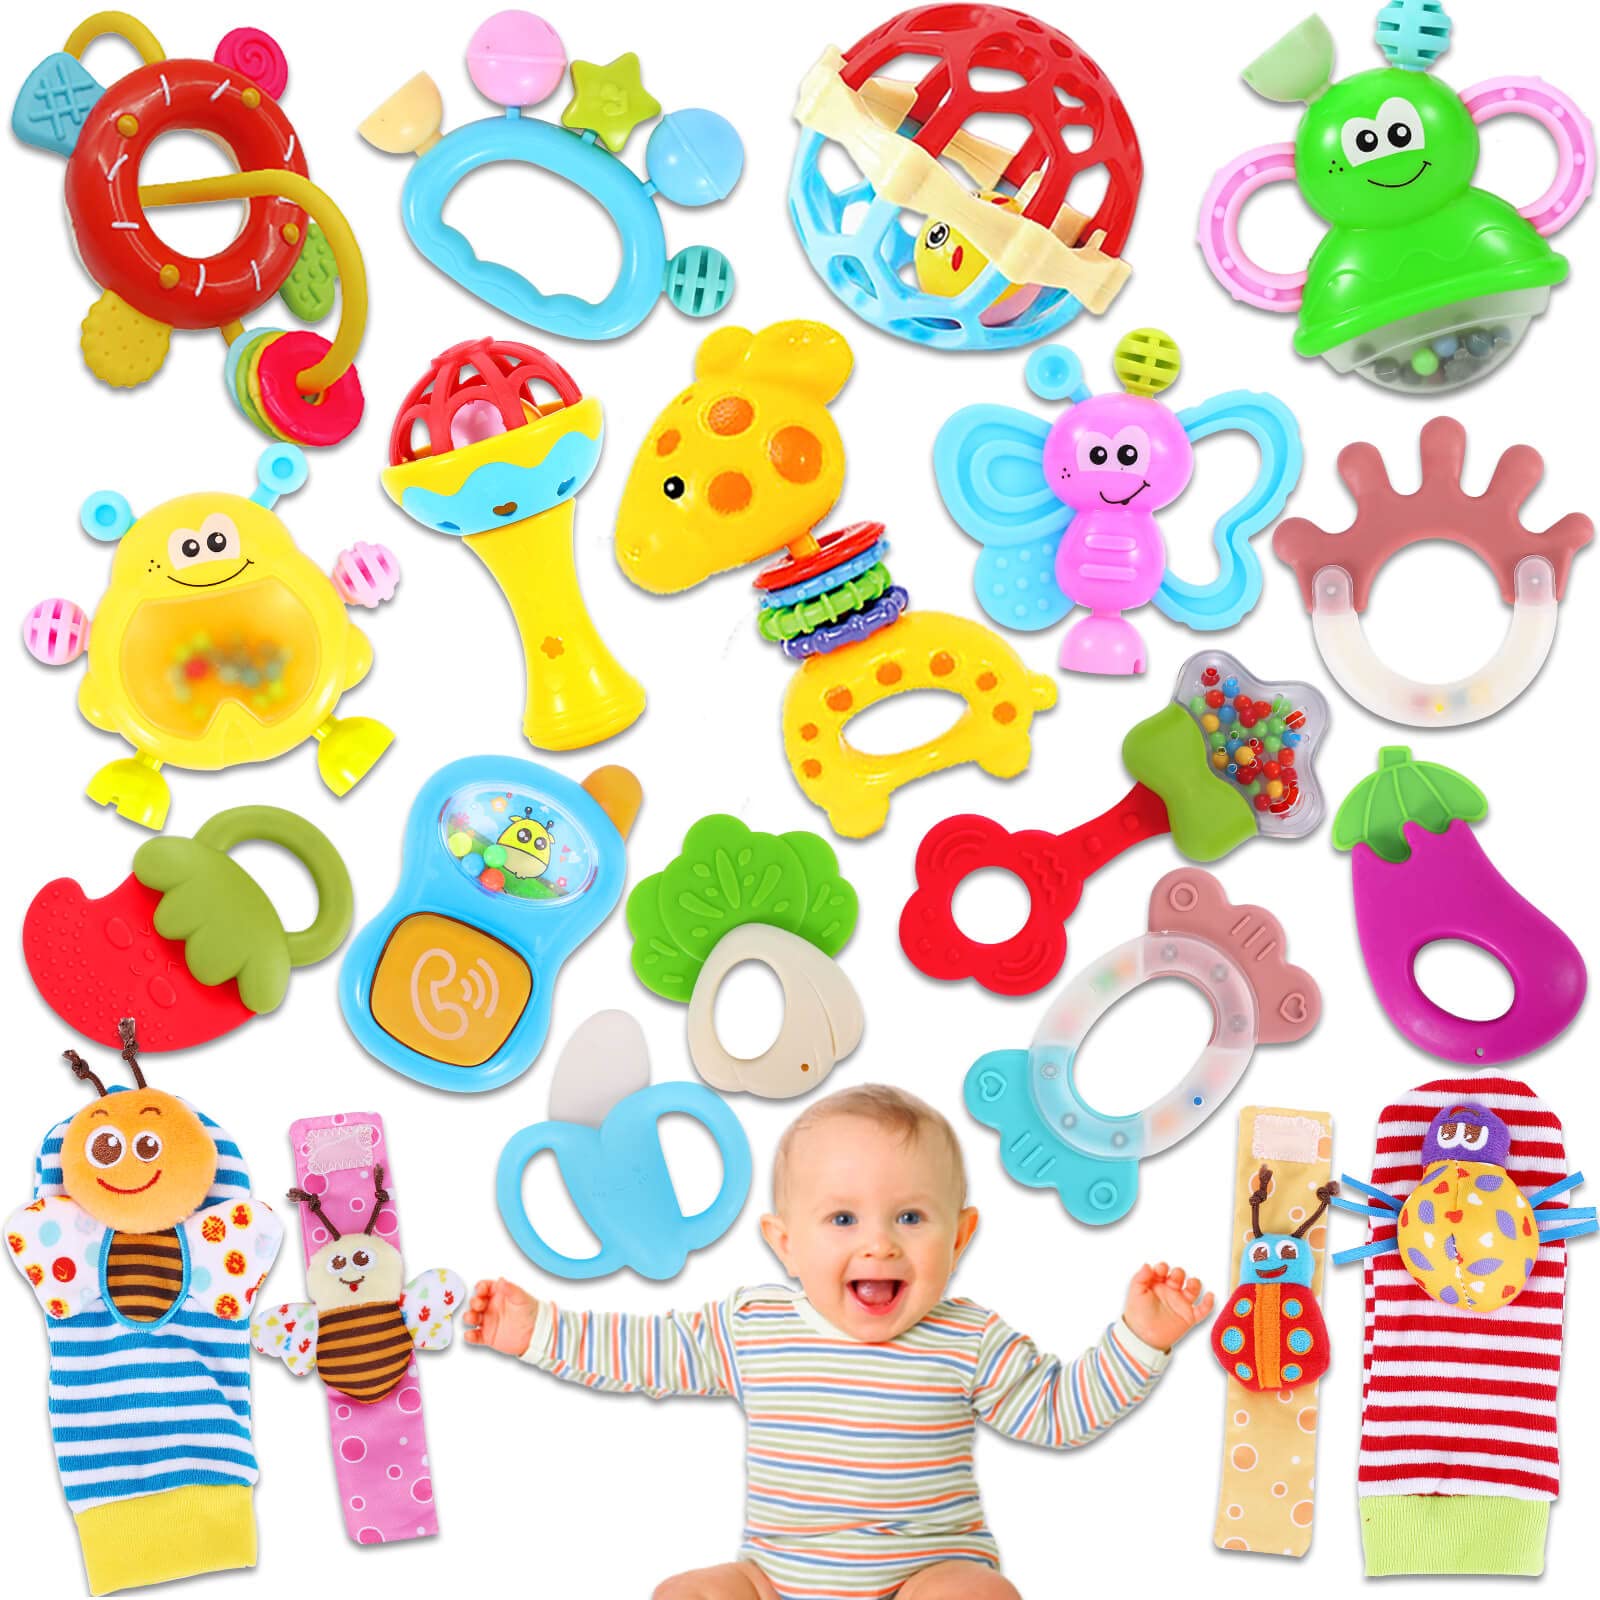 Buy Baby Toys for 0-12 Months Infant Rattle Toy Socks Wrist